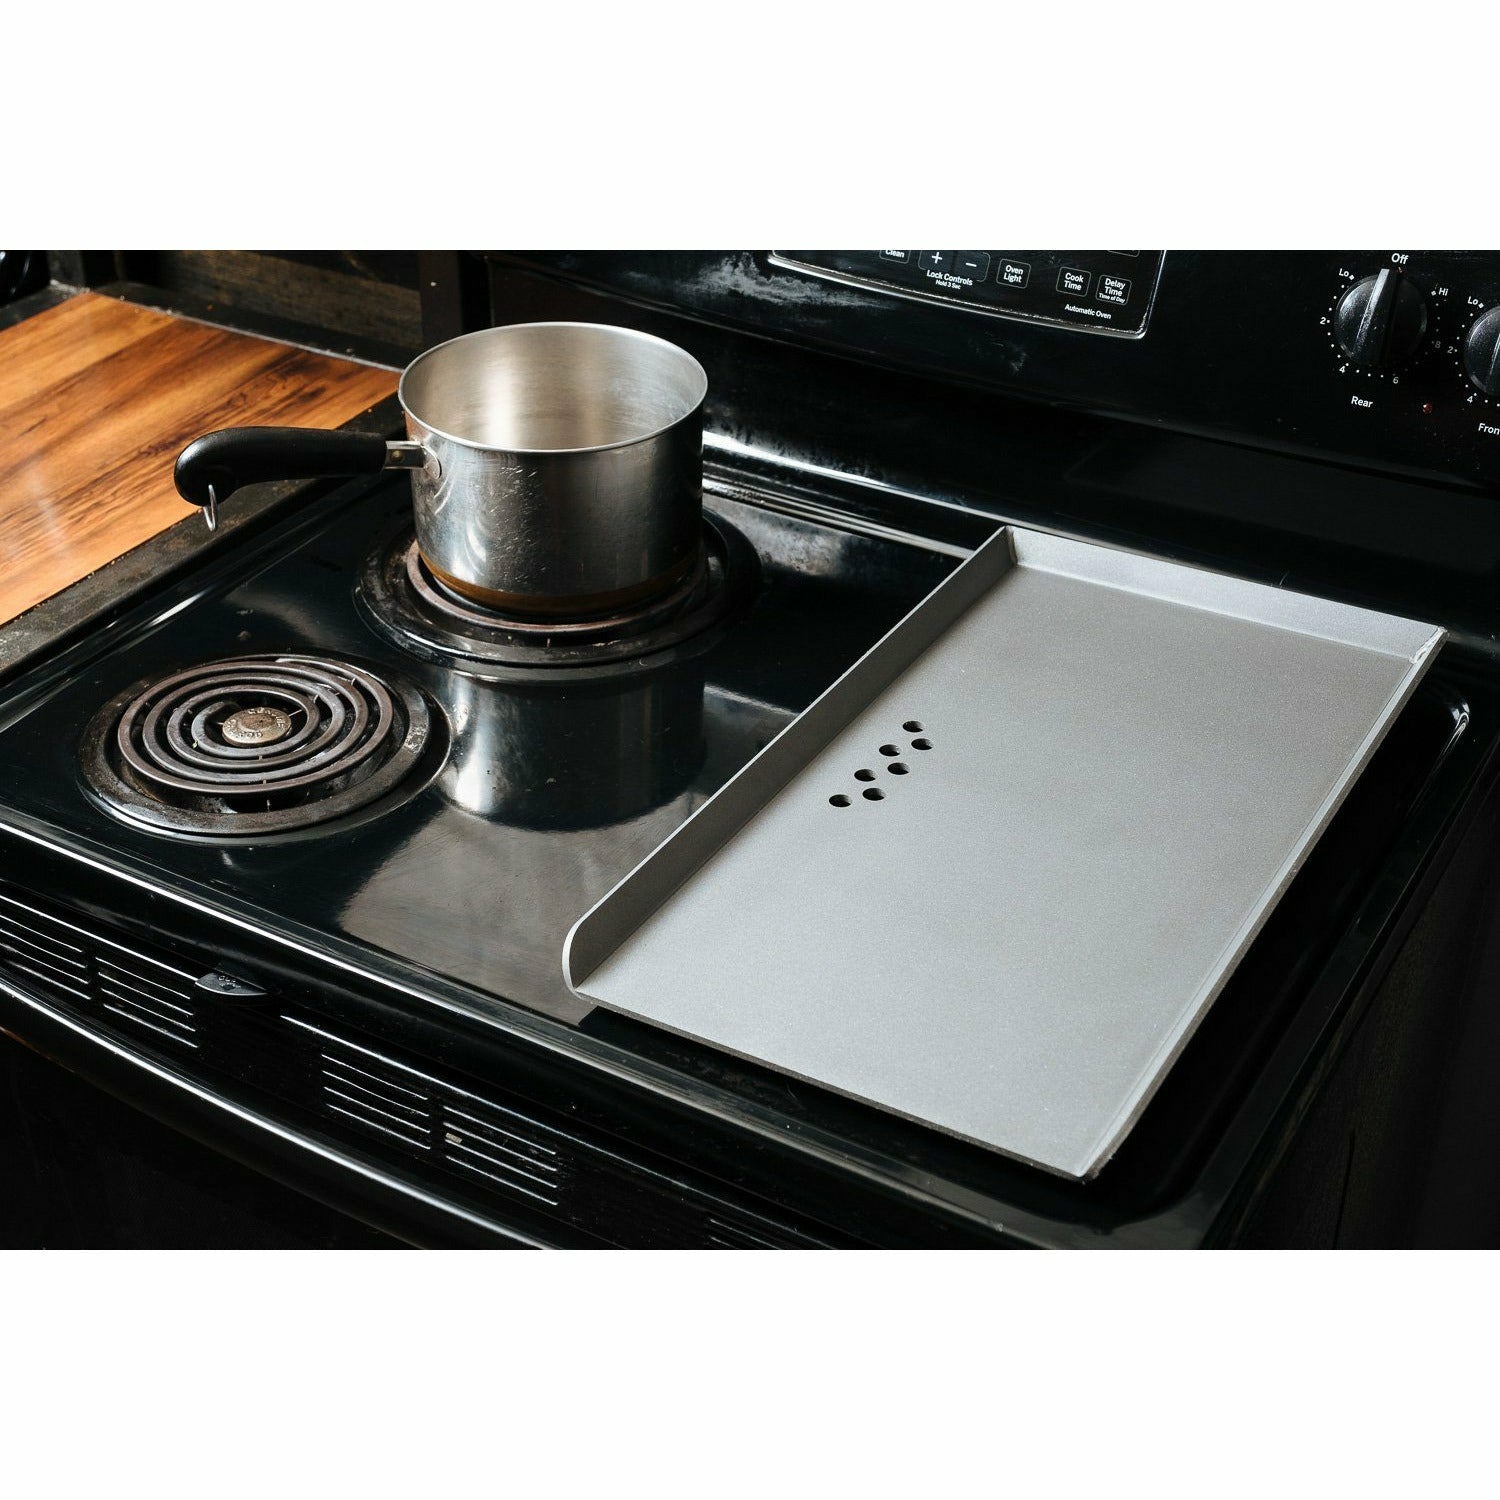 Griddle Included Electric Cooktops at